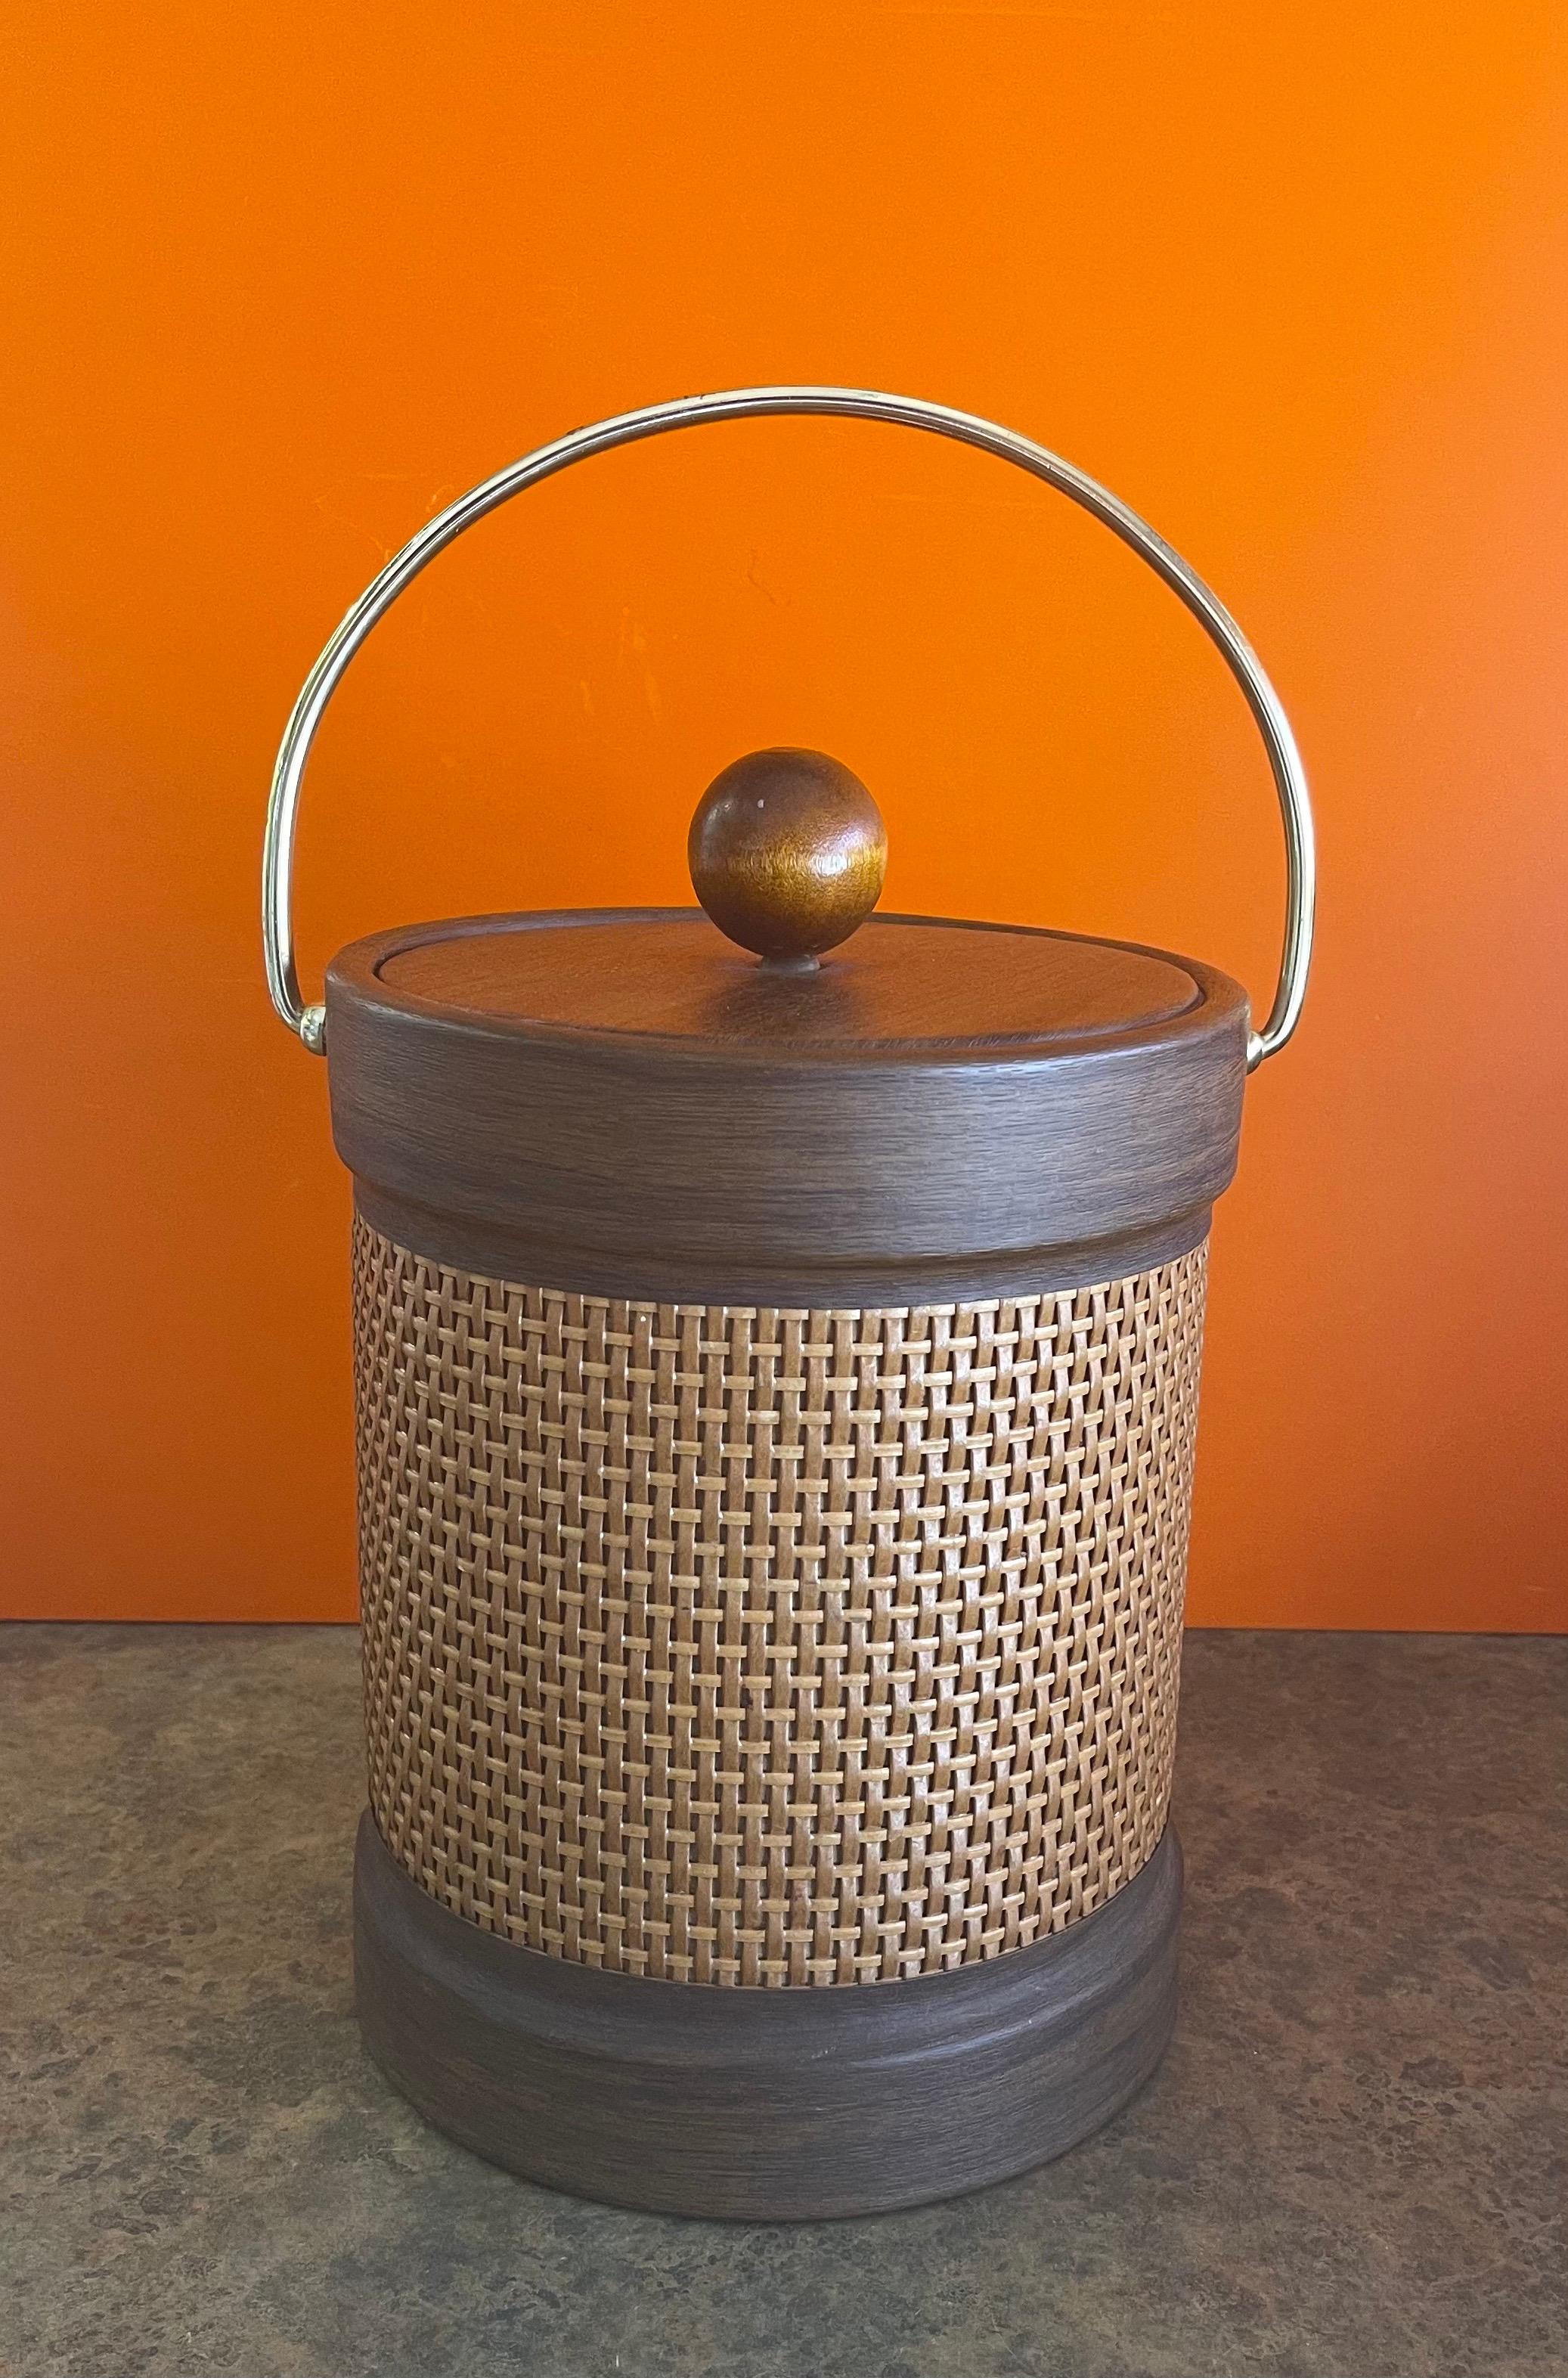 A very nice mid-century wicker wrapped ice bucket with handle by Georges Briard, circa 1970s. The piece is in very good condition and measures 8.5